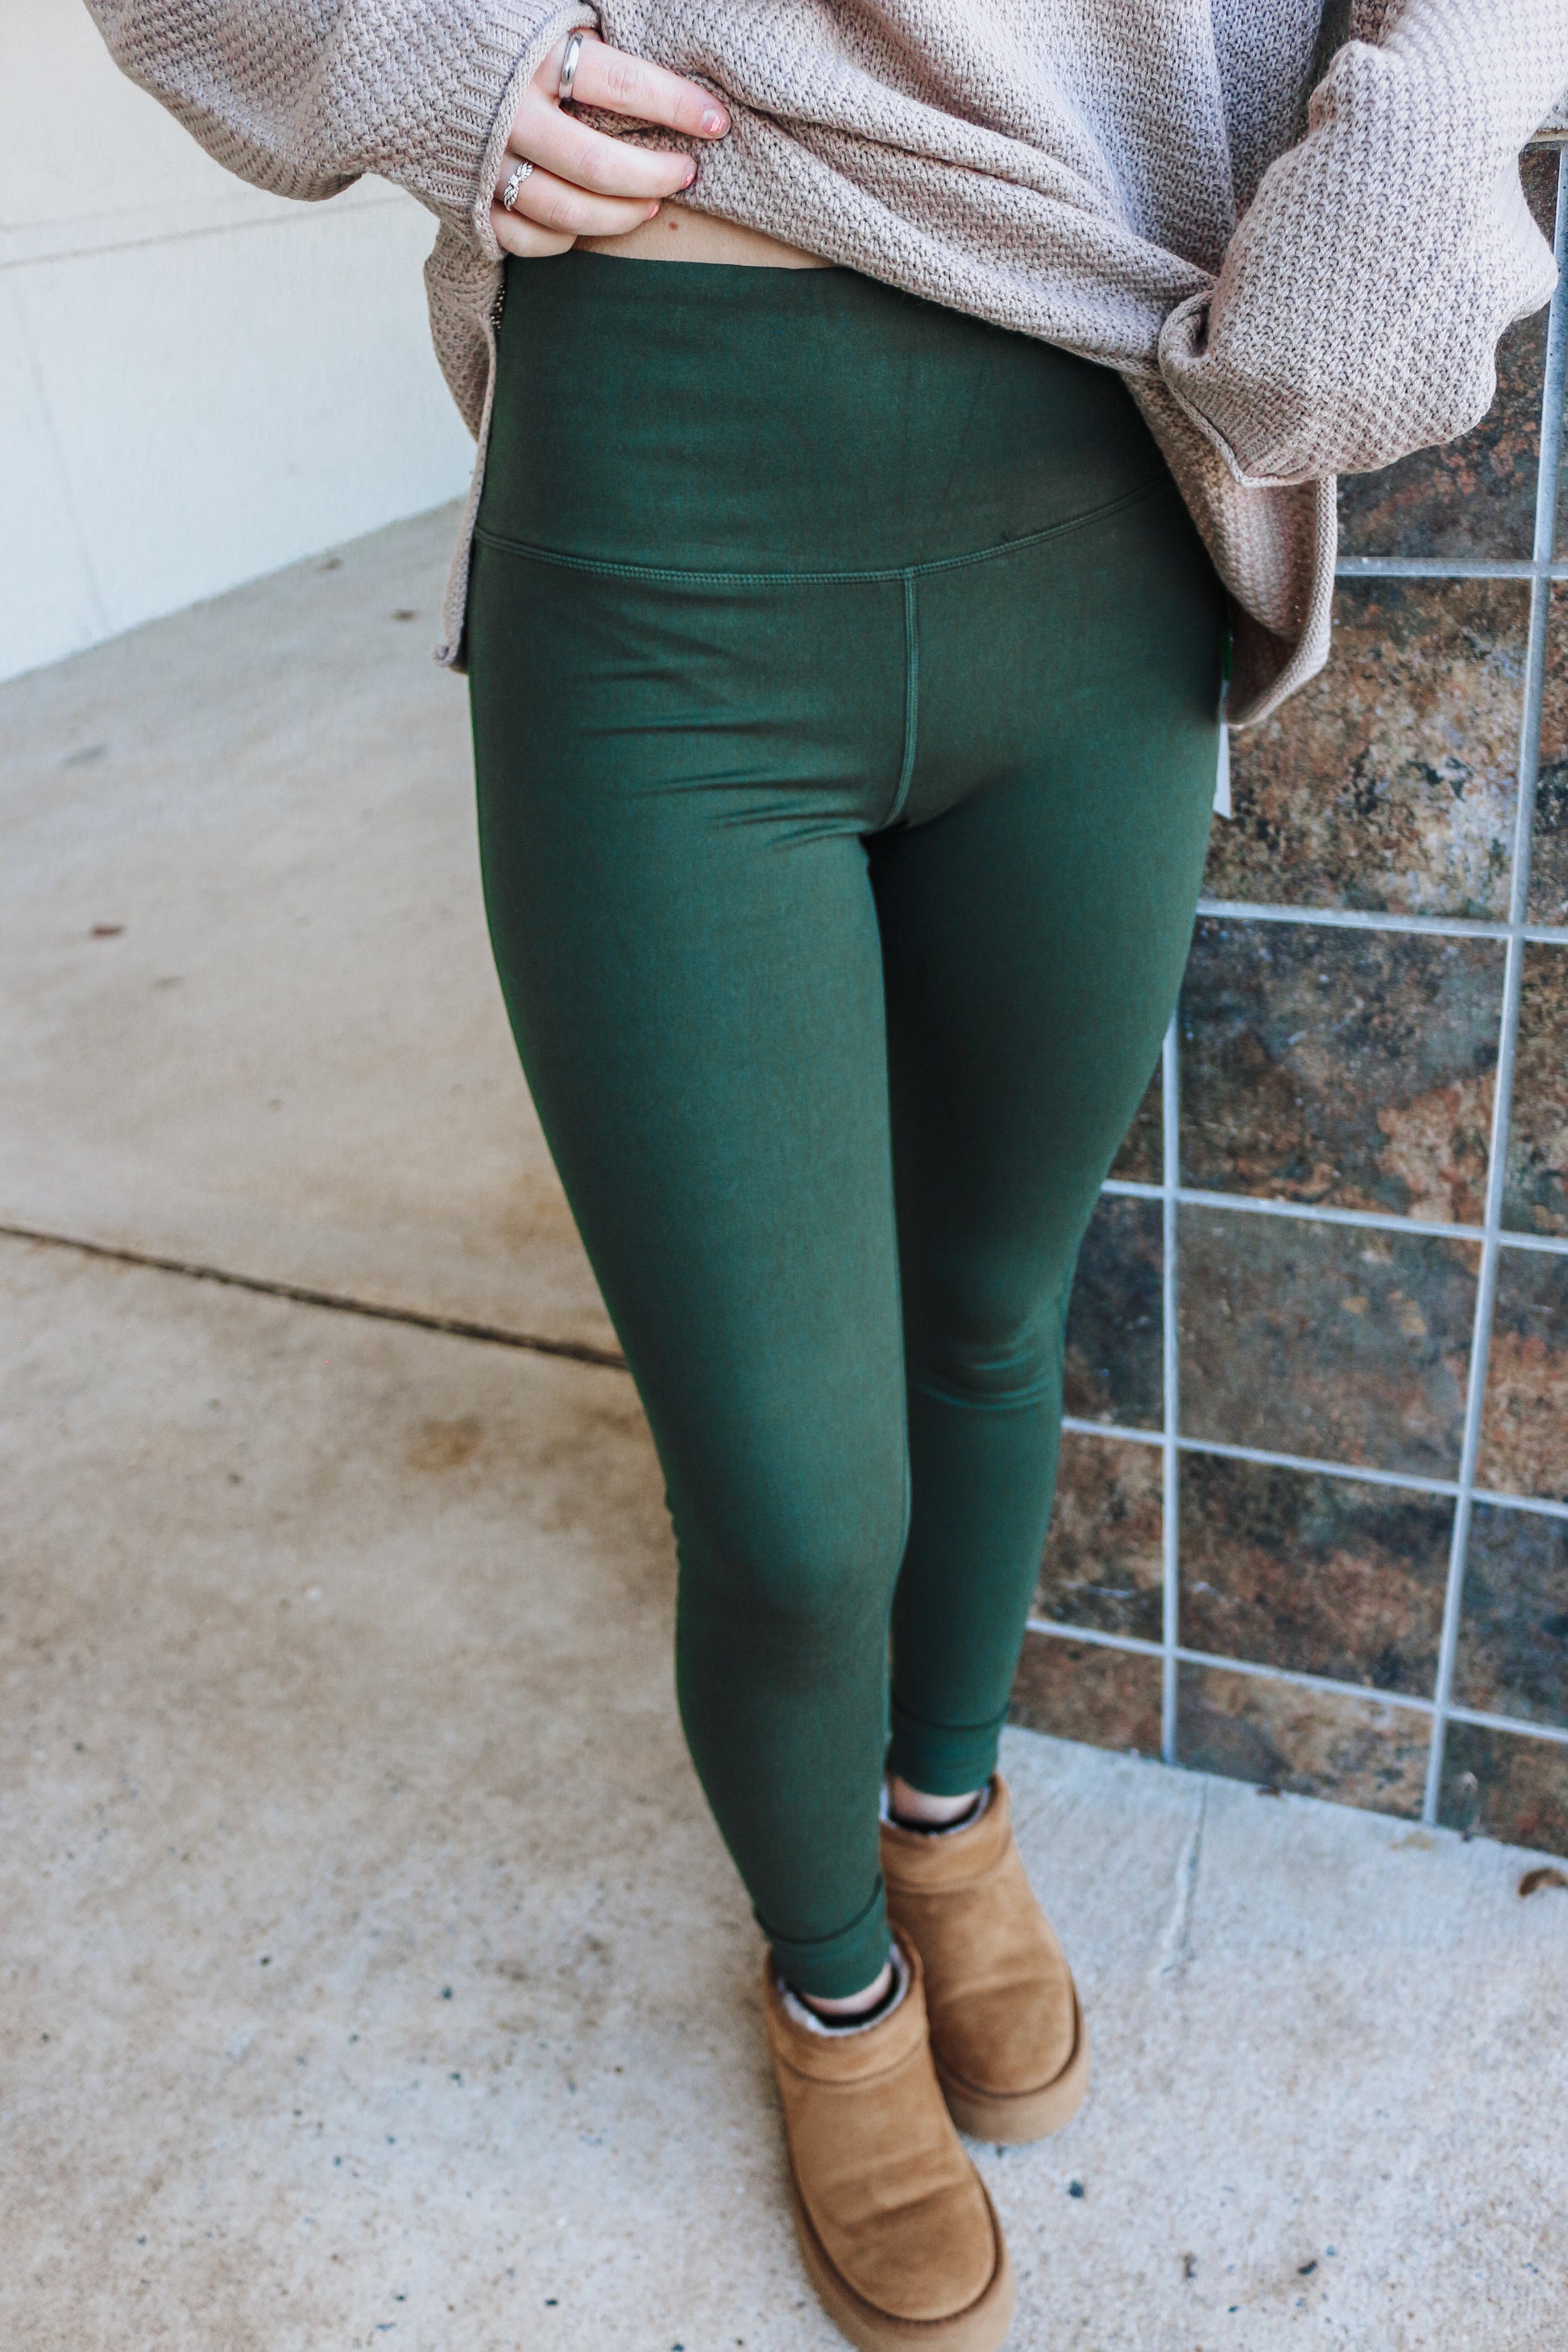 anyone have any idea on the style of these leggings? they look soo